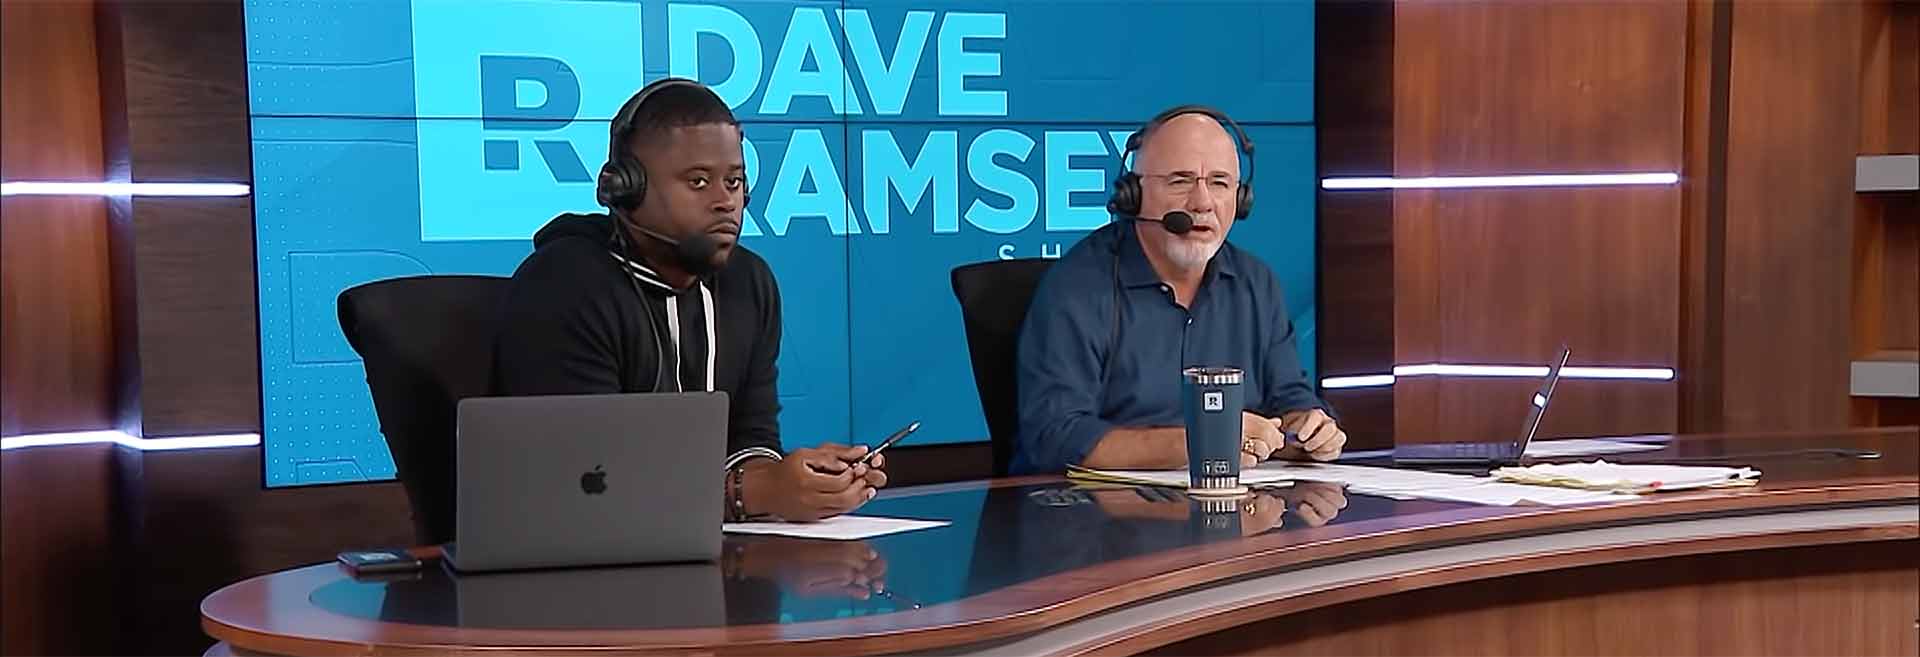 Dave Ramsey and Anthony Oneal criticize the Infinite Banking Concept